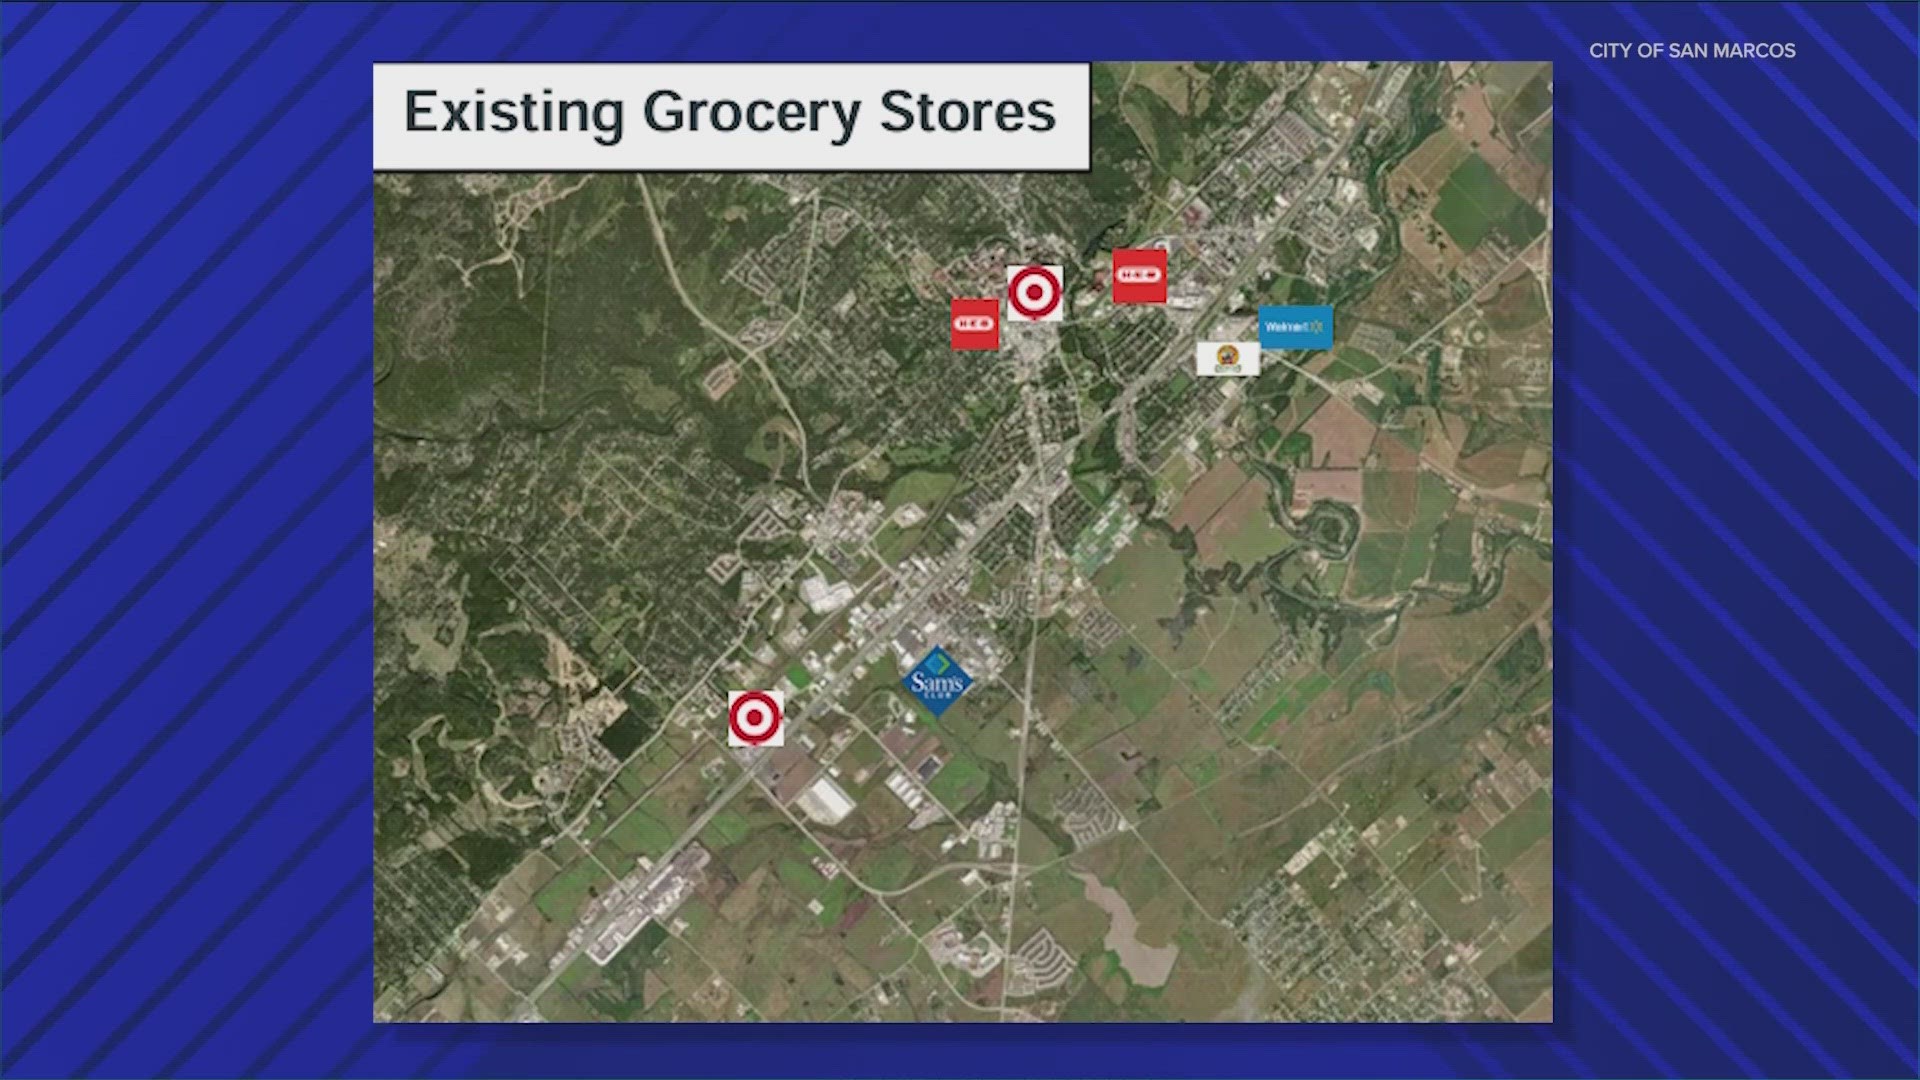 The San Marcos City Council is considering new tax incentives to bring more grocery stores to town.